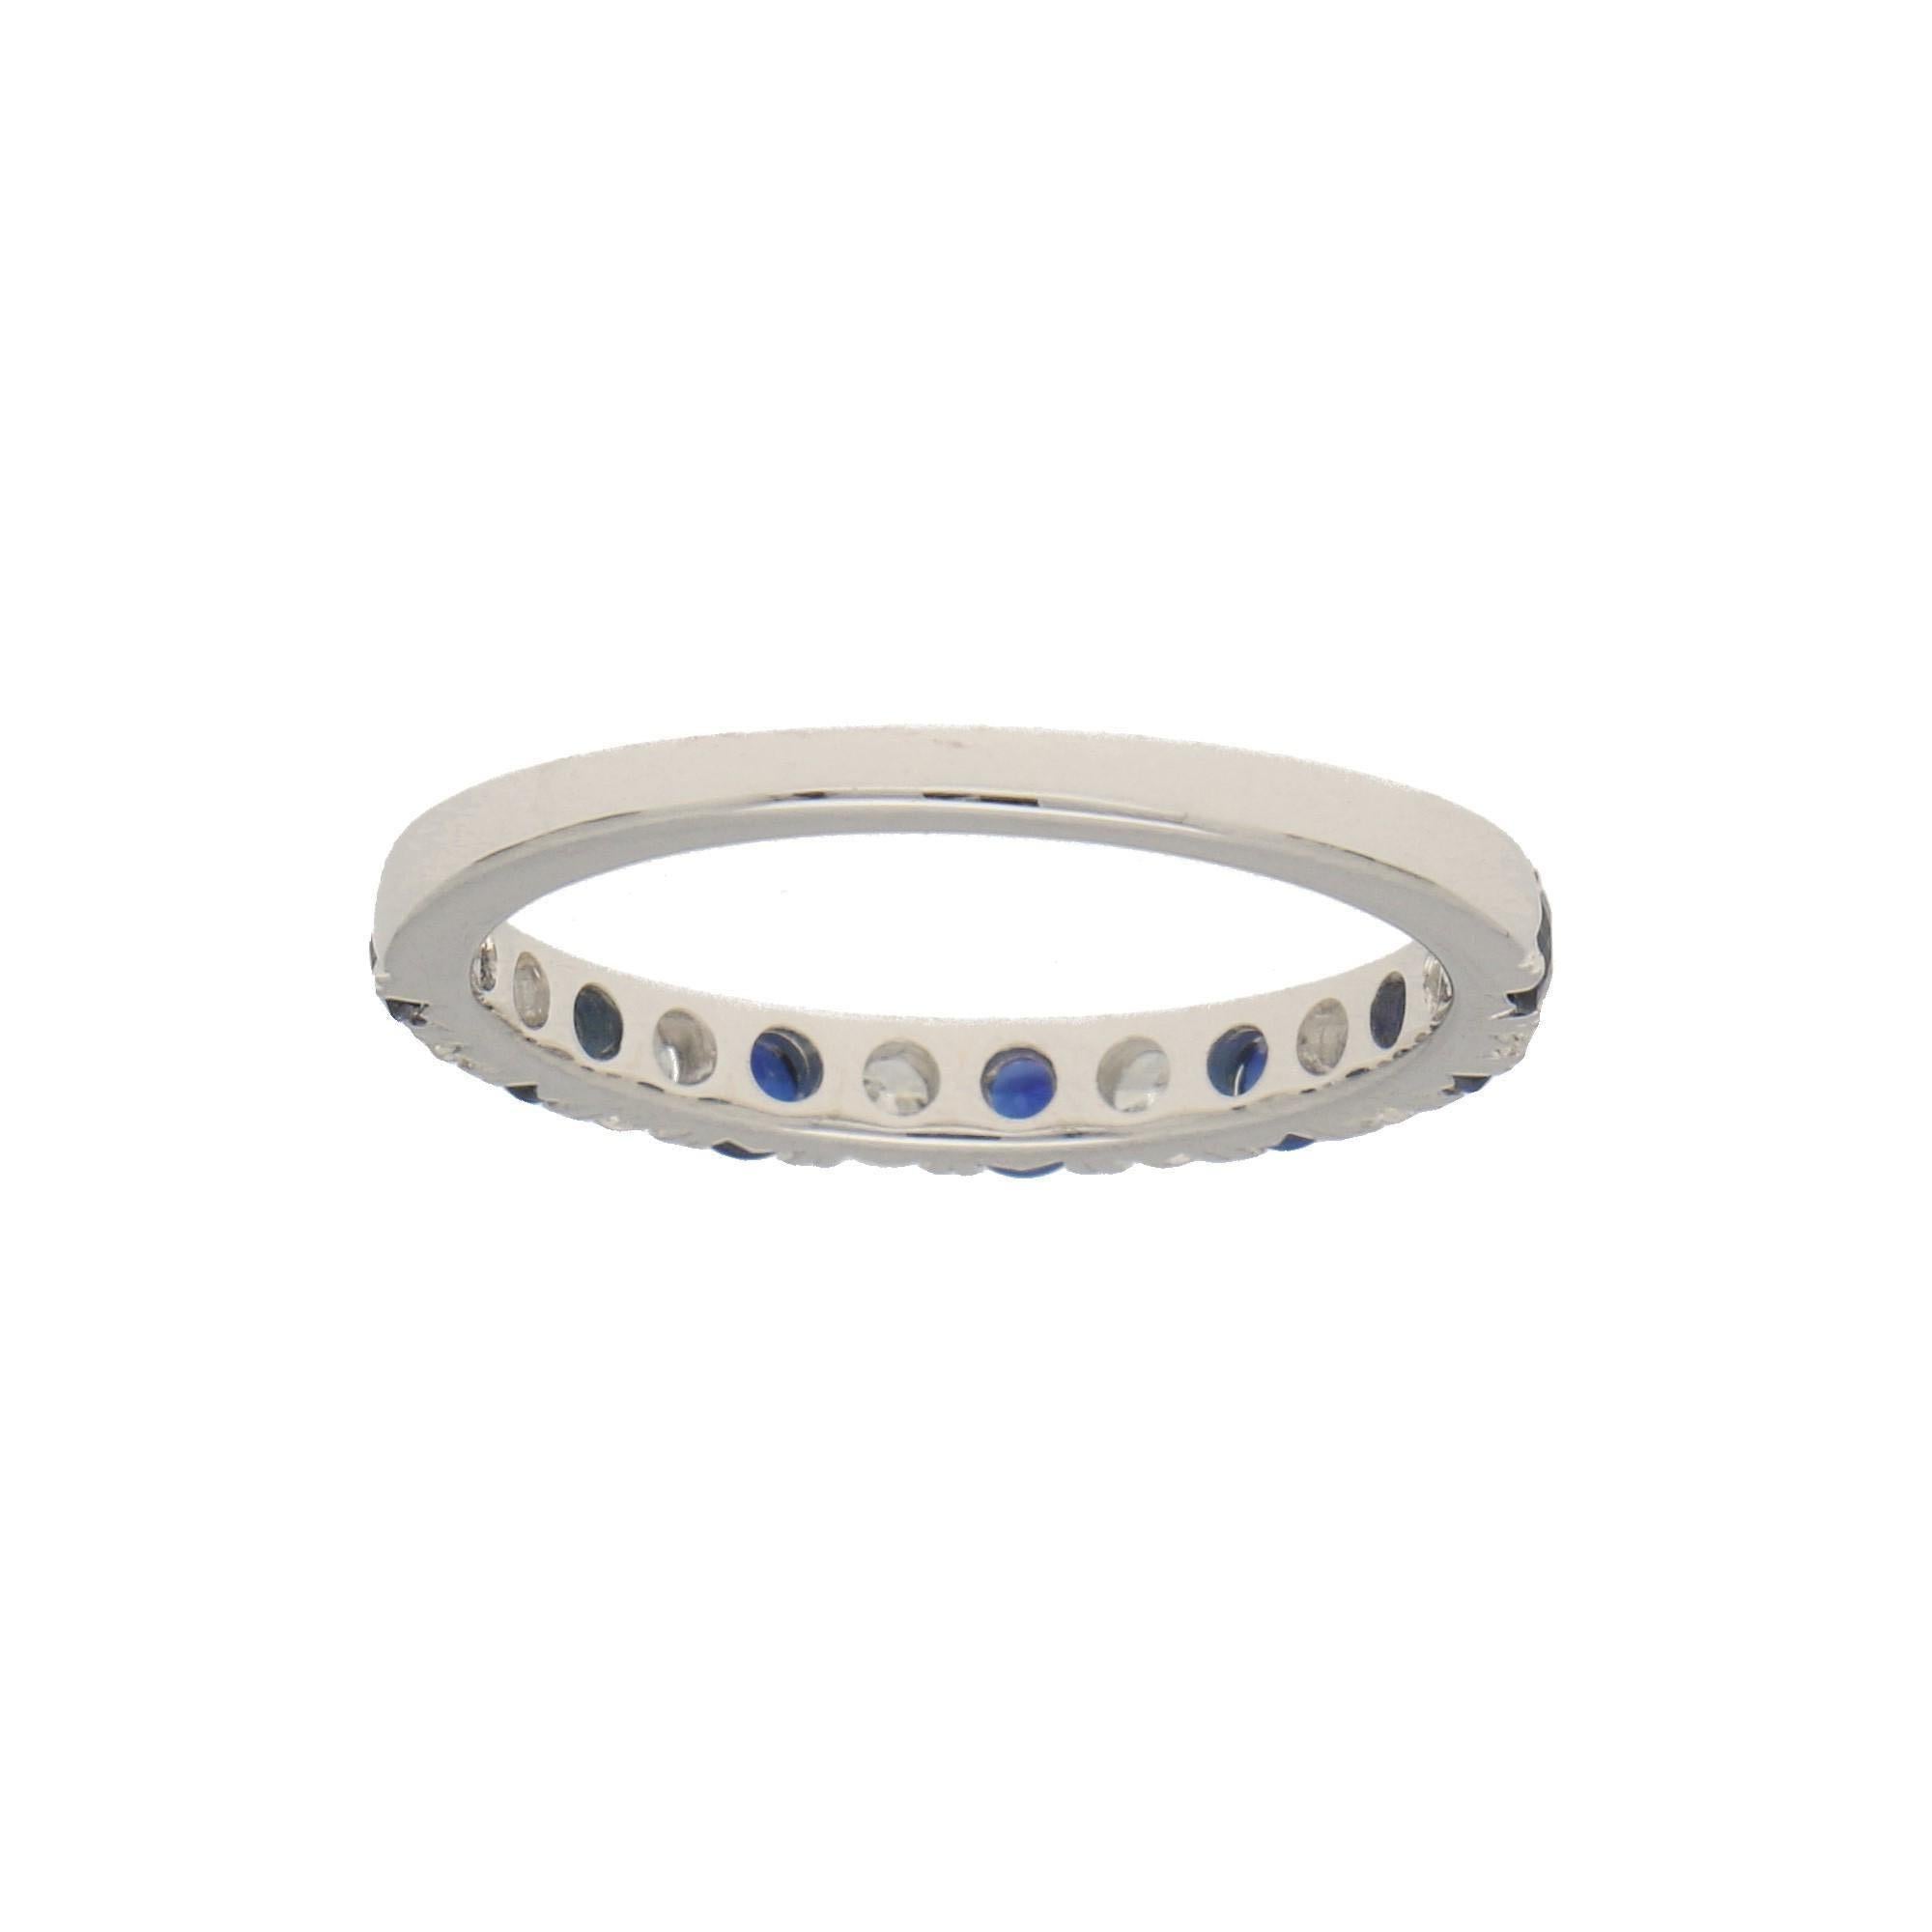 A beautiful diamond and sapphire half eternity ring set in 18k white gold. The ring is composed of 13 round brilliant cut stones altogether, 7 of which being sapphires and 6 diamonds. All the stones are perfectly set within a 2mm white gold